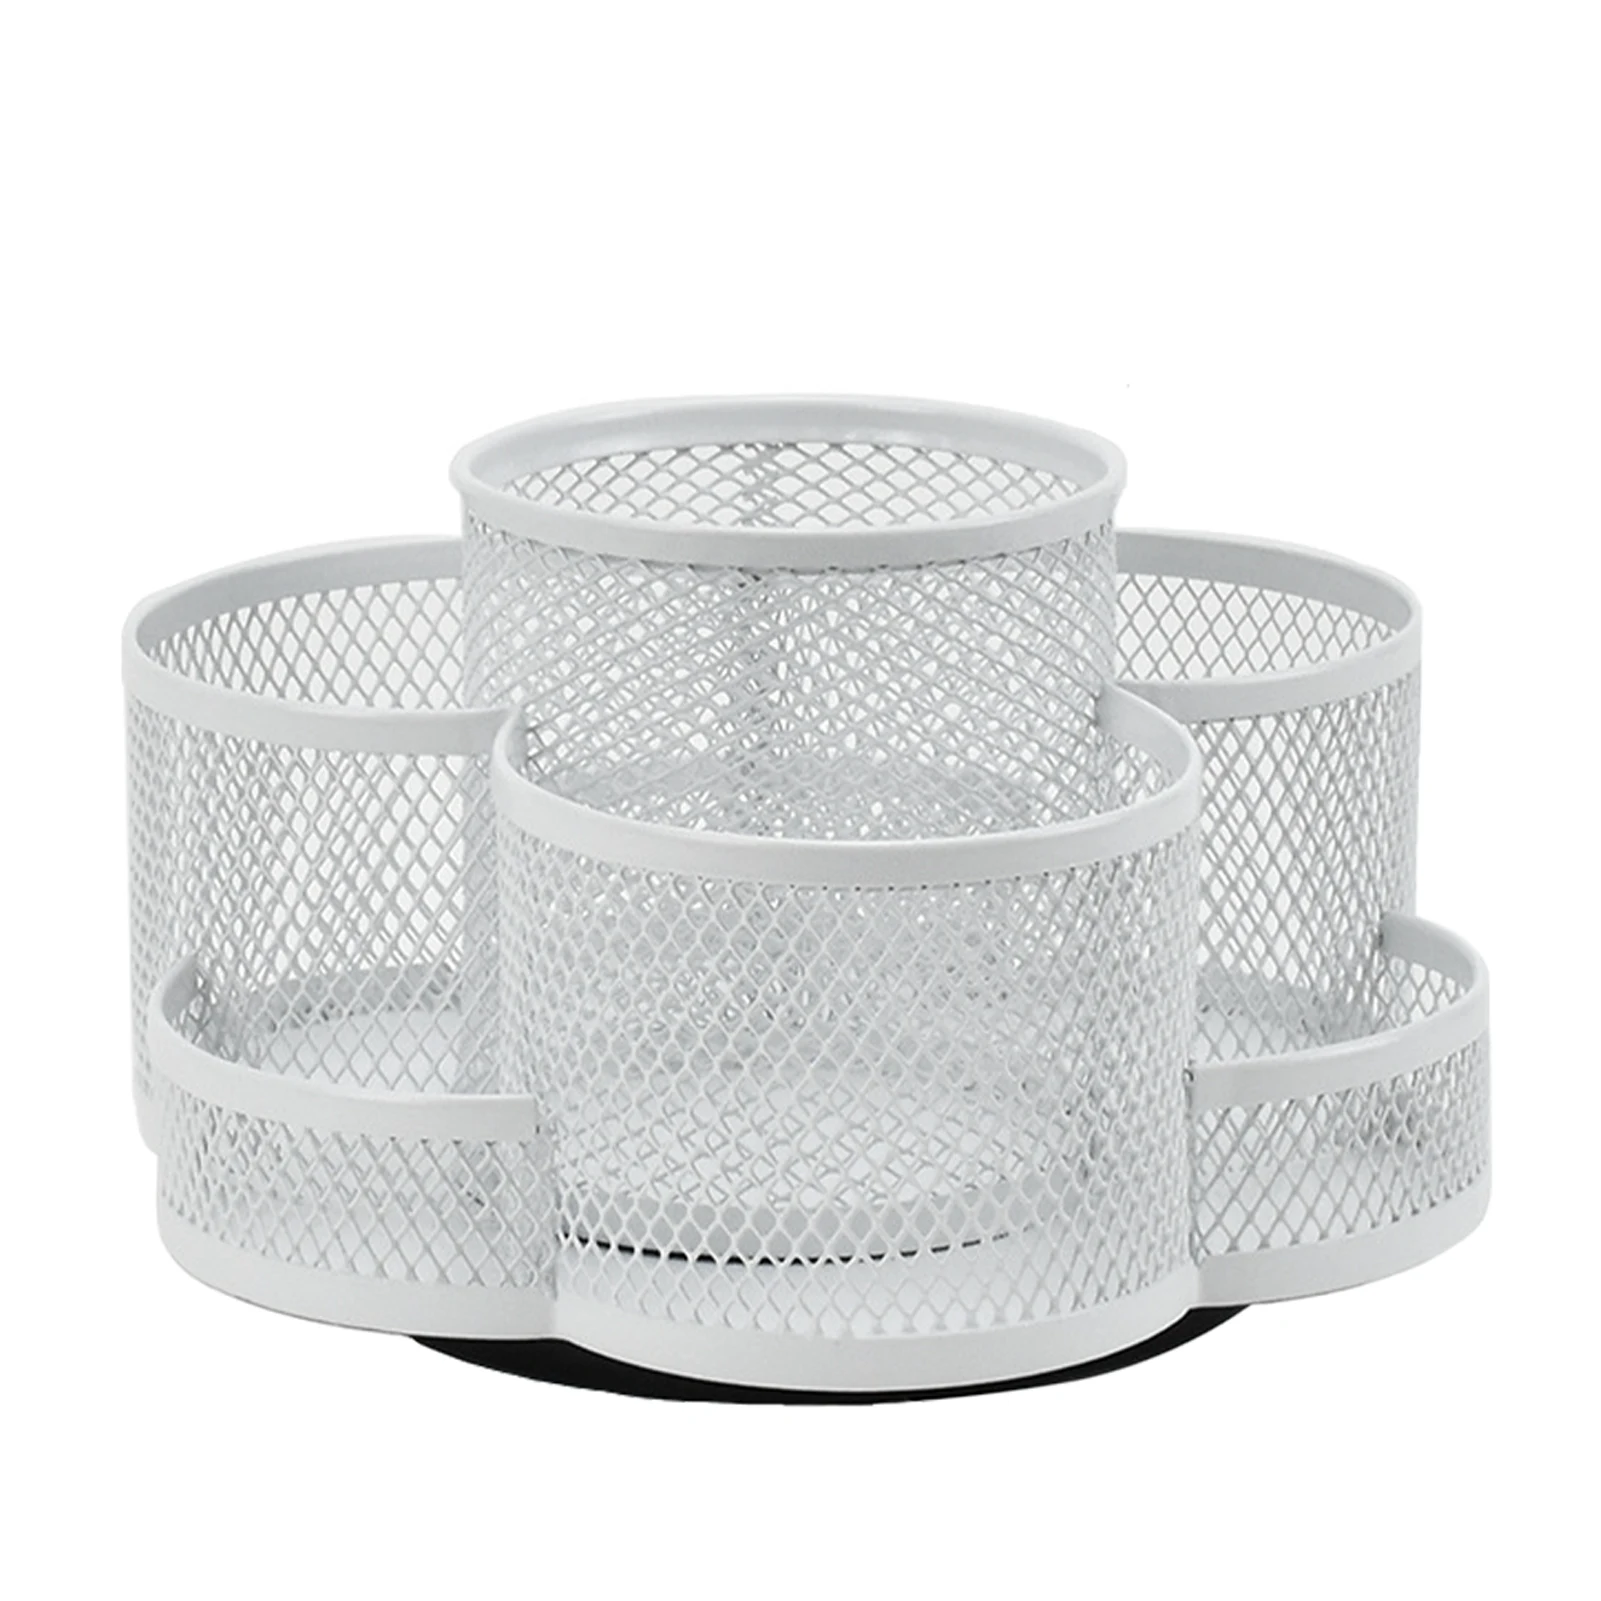 

Alloy Workspace Storage Basket 360 Degree Rotating Pencil Holder Space Saving Mesh Design Stationary 7 Compartments Easy Clean